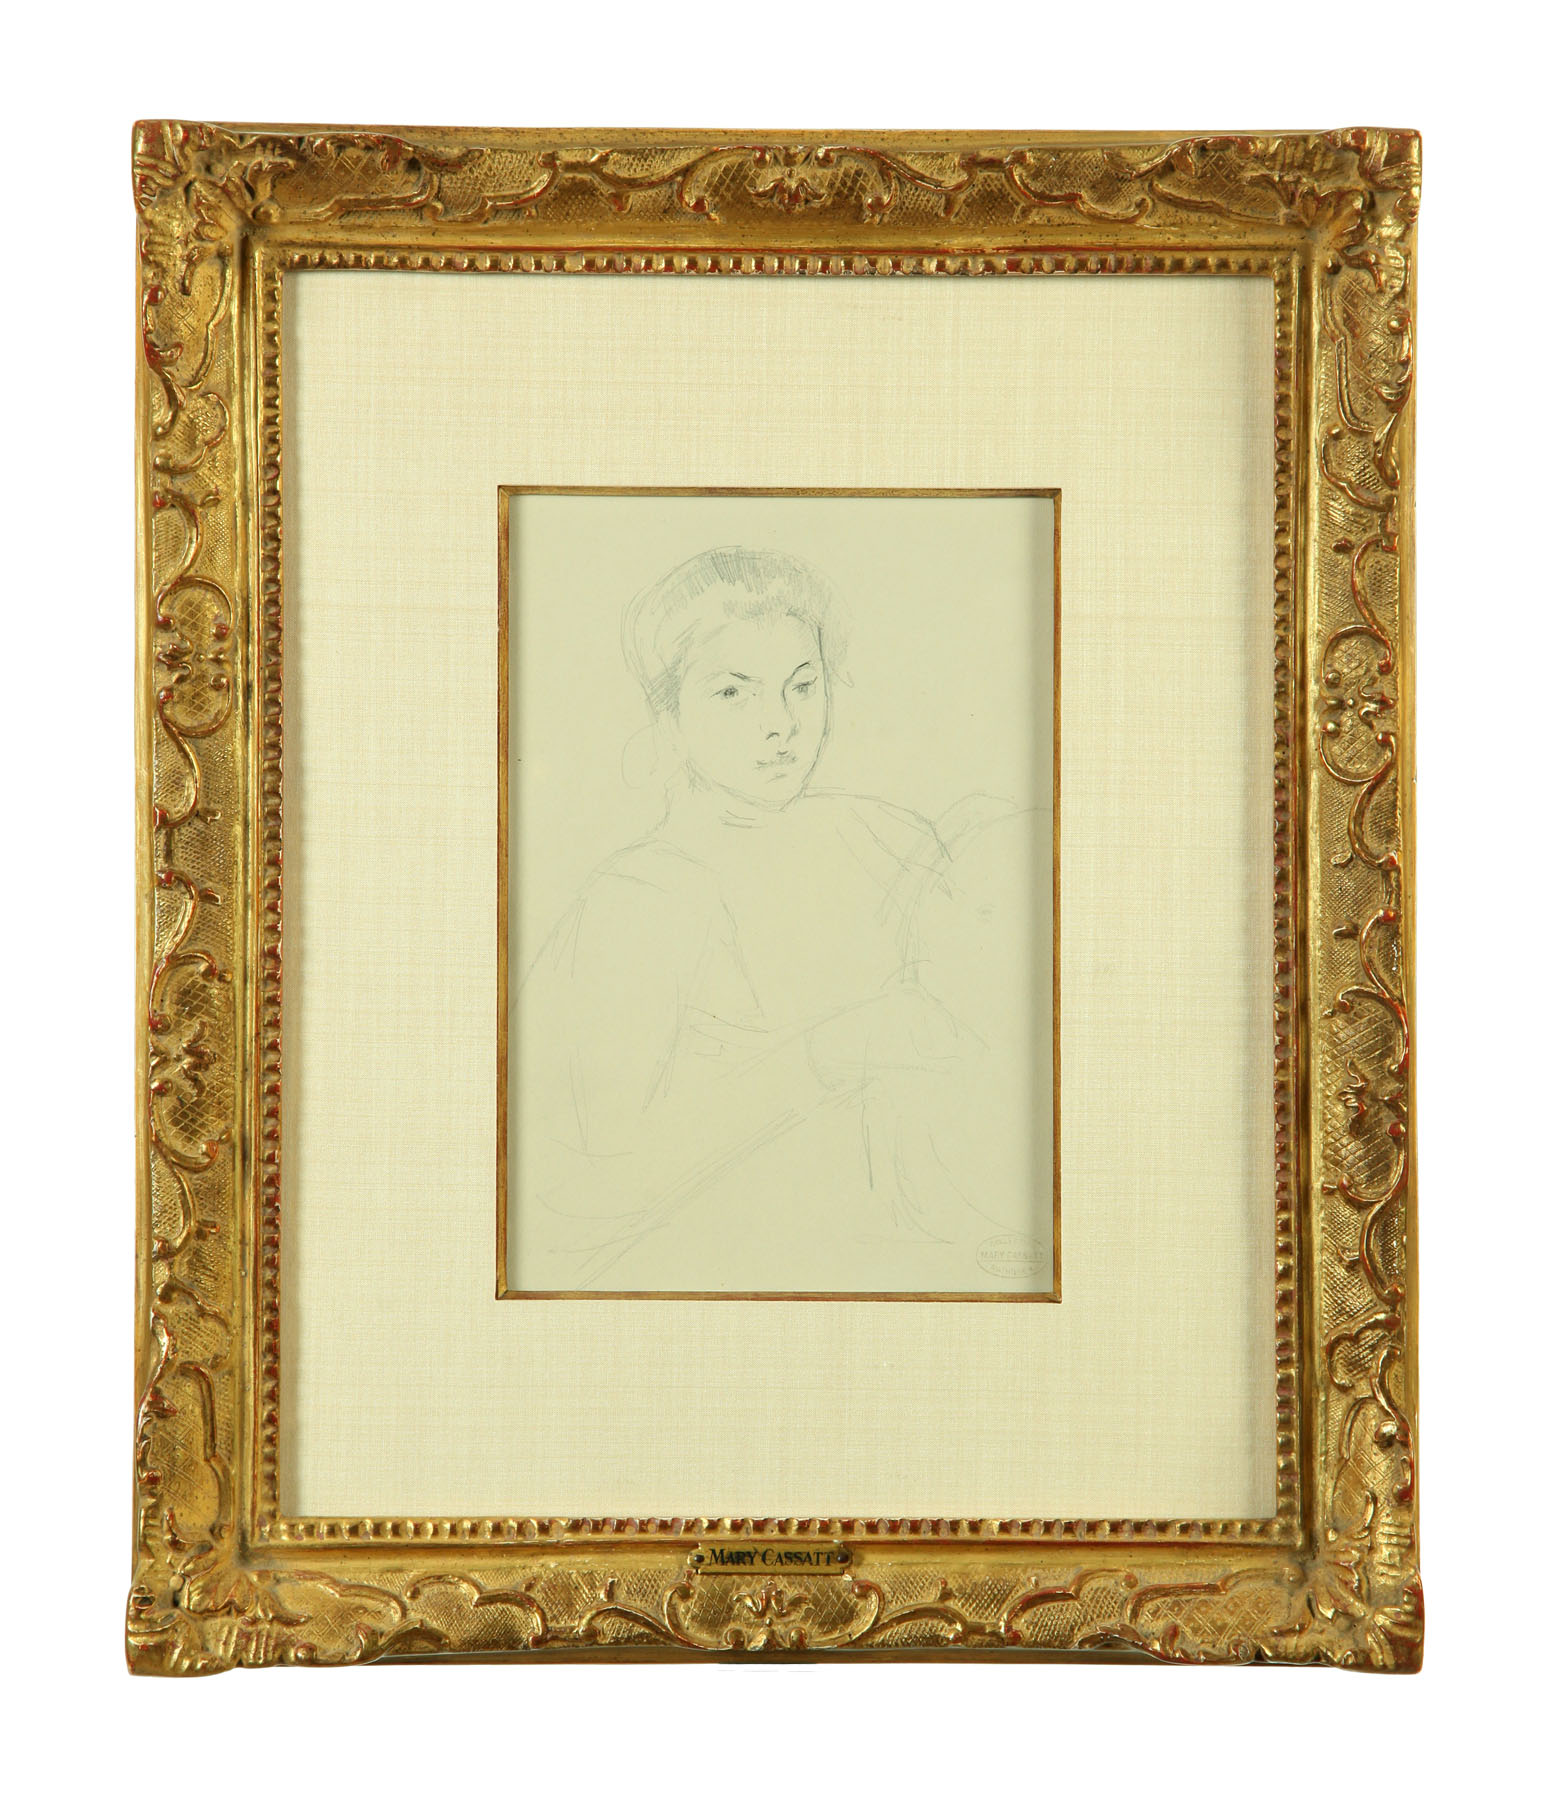 SKETCH OF A YOUNG WOMAN BY MARY